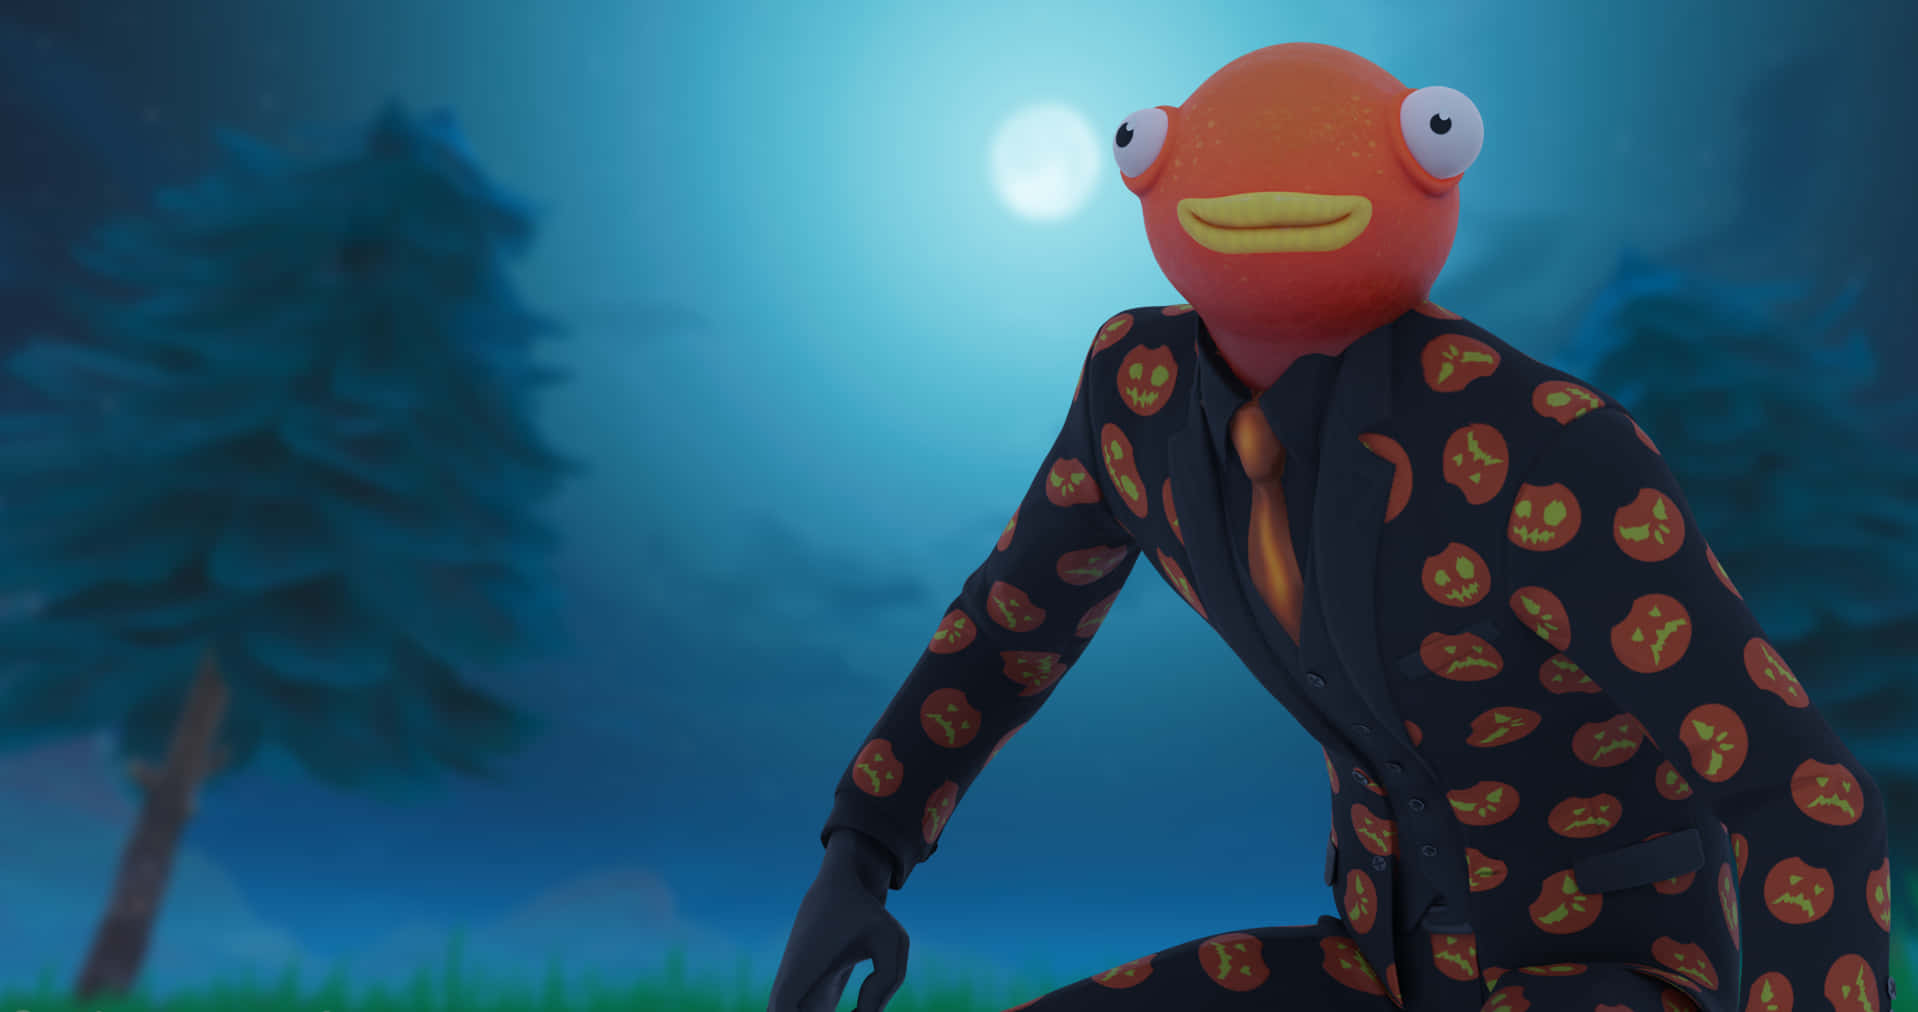 Try out the cool new Fishstick character in the fun and popular Fortnite game! Wallpaper